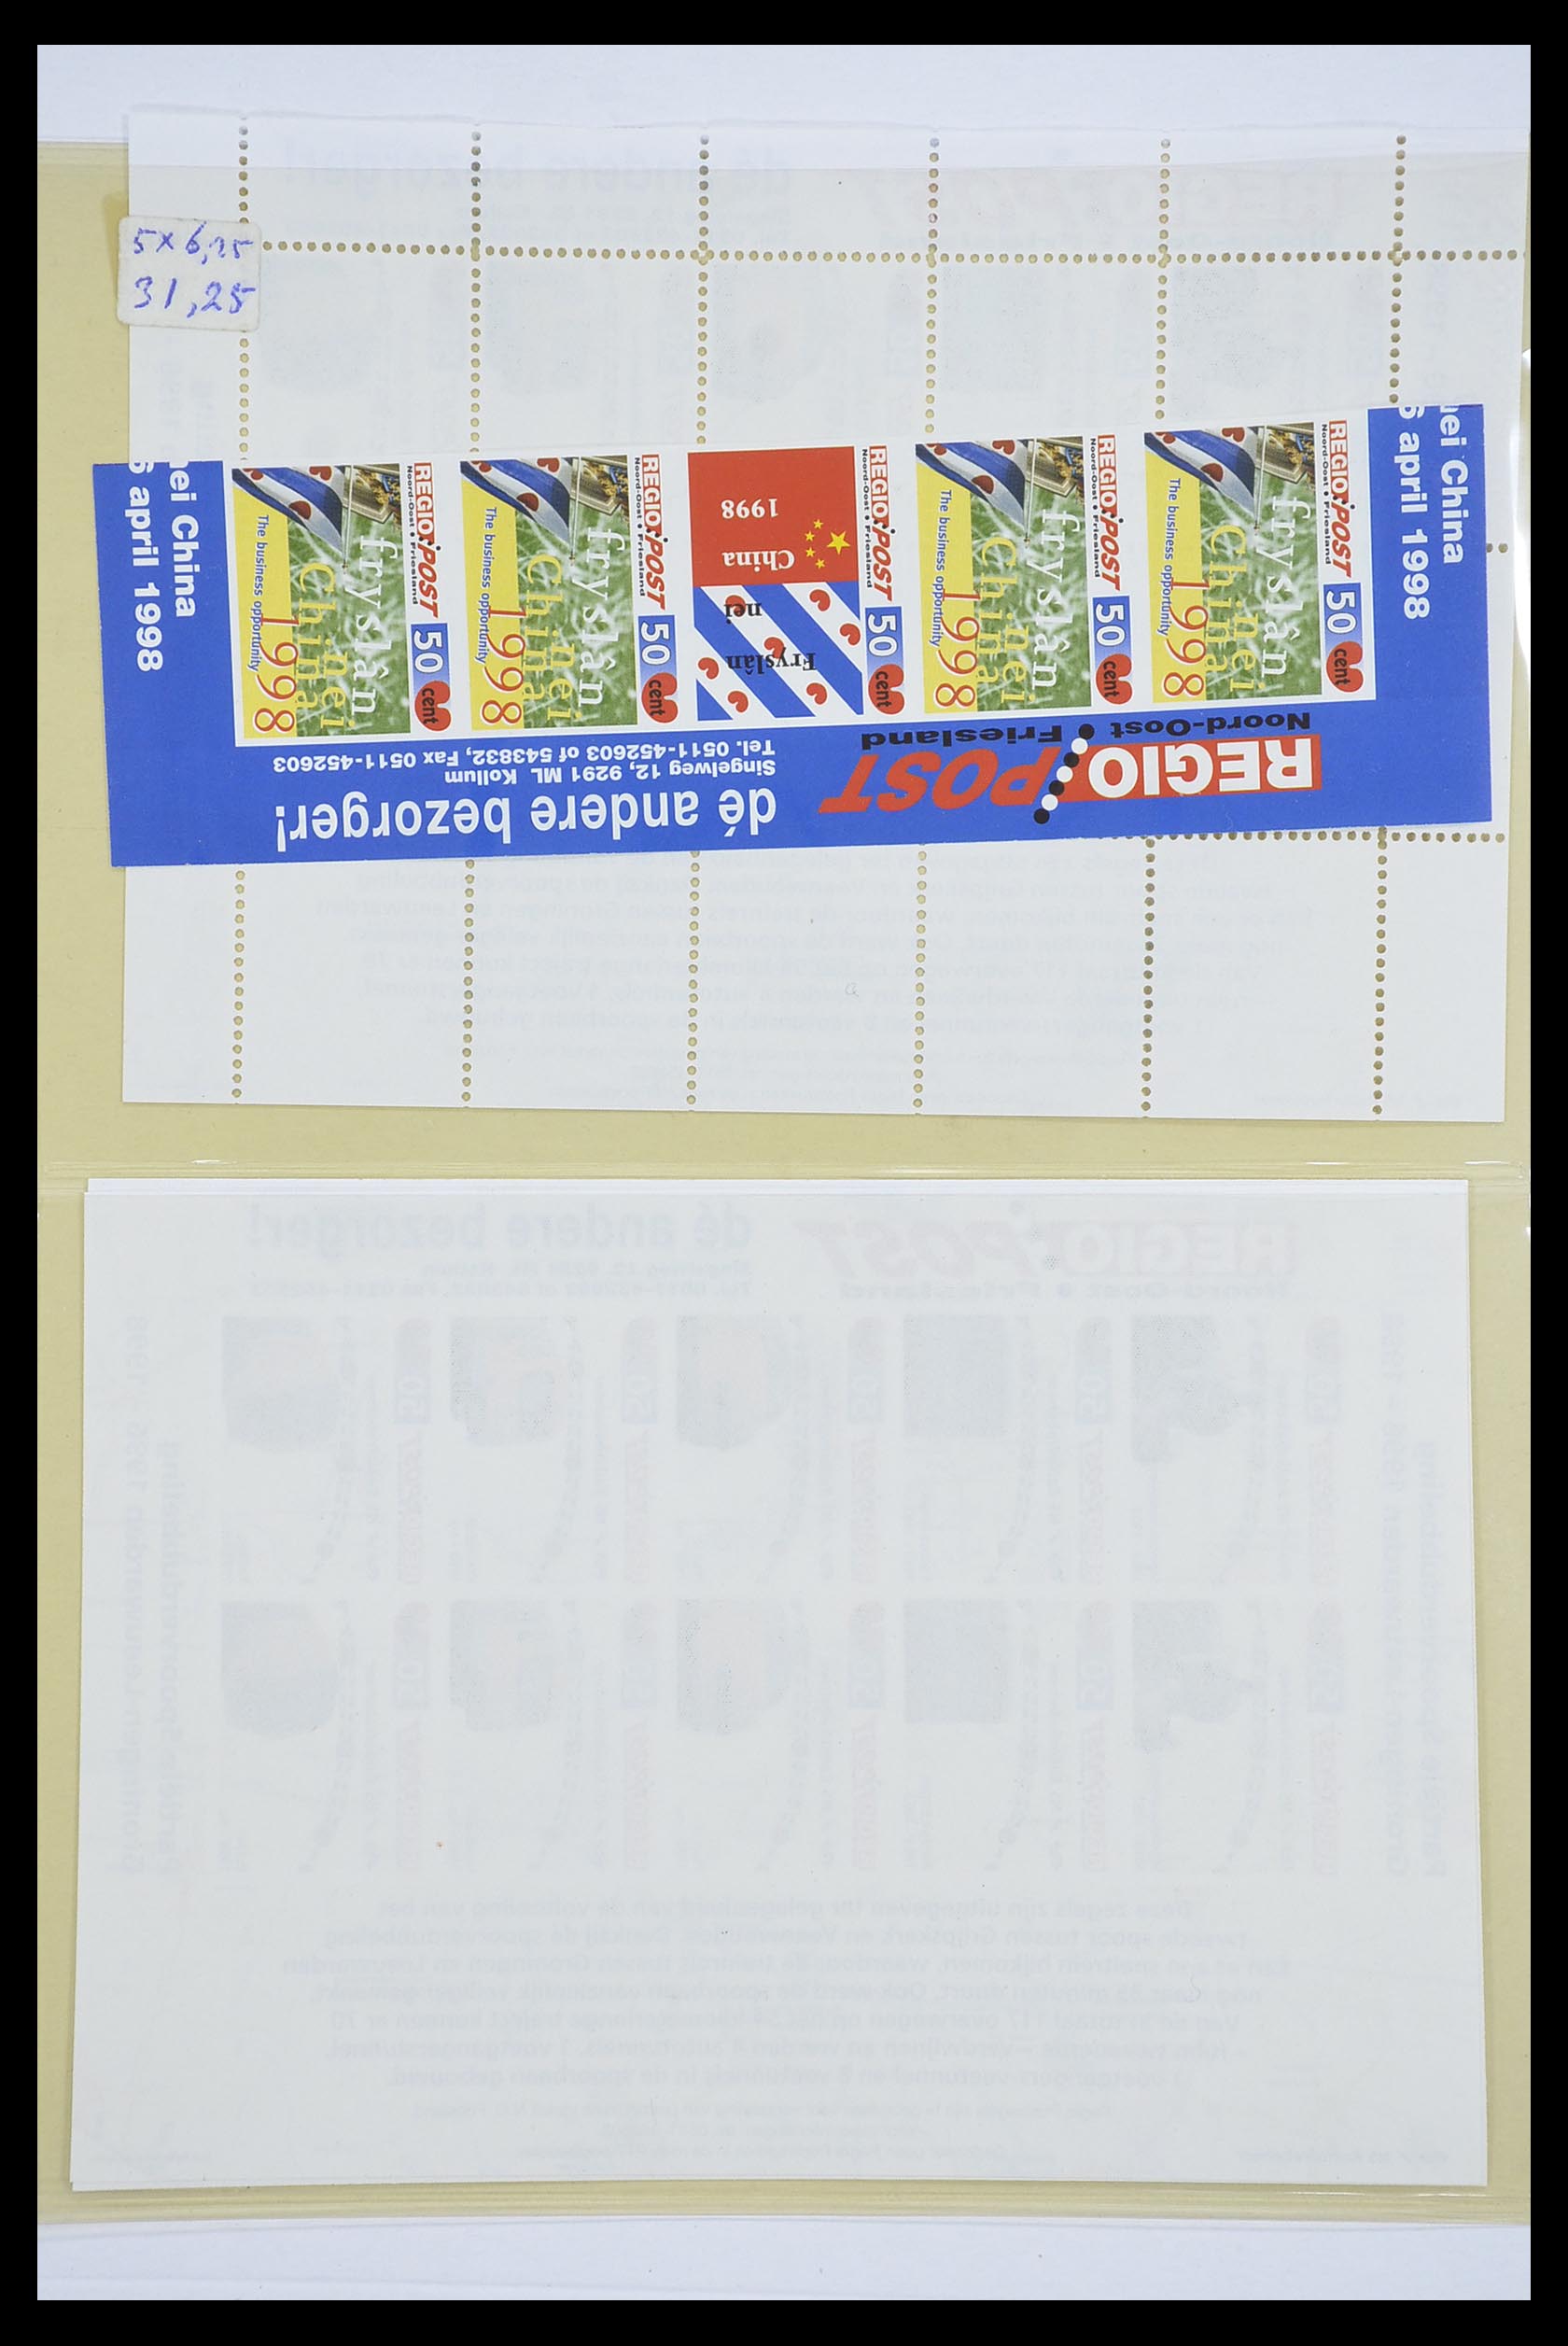 33543 031 - Stamp collection 33543 Netherlands local post 1969-2017.